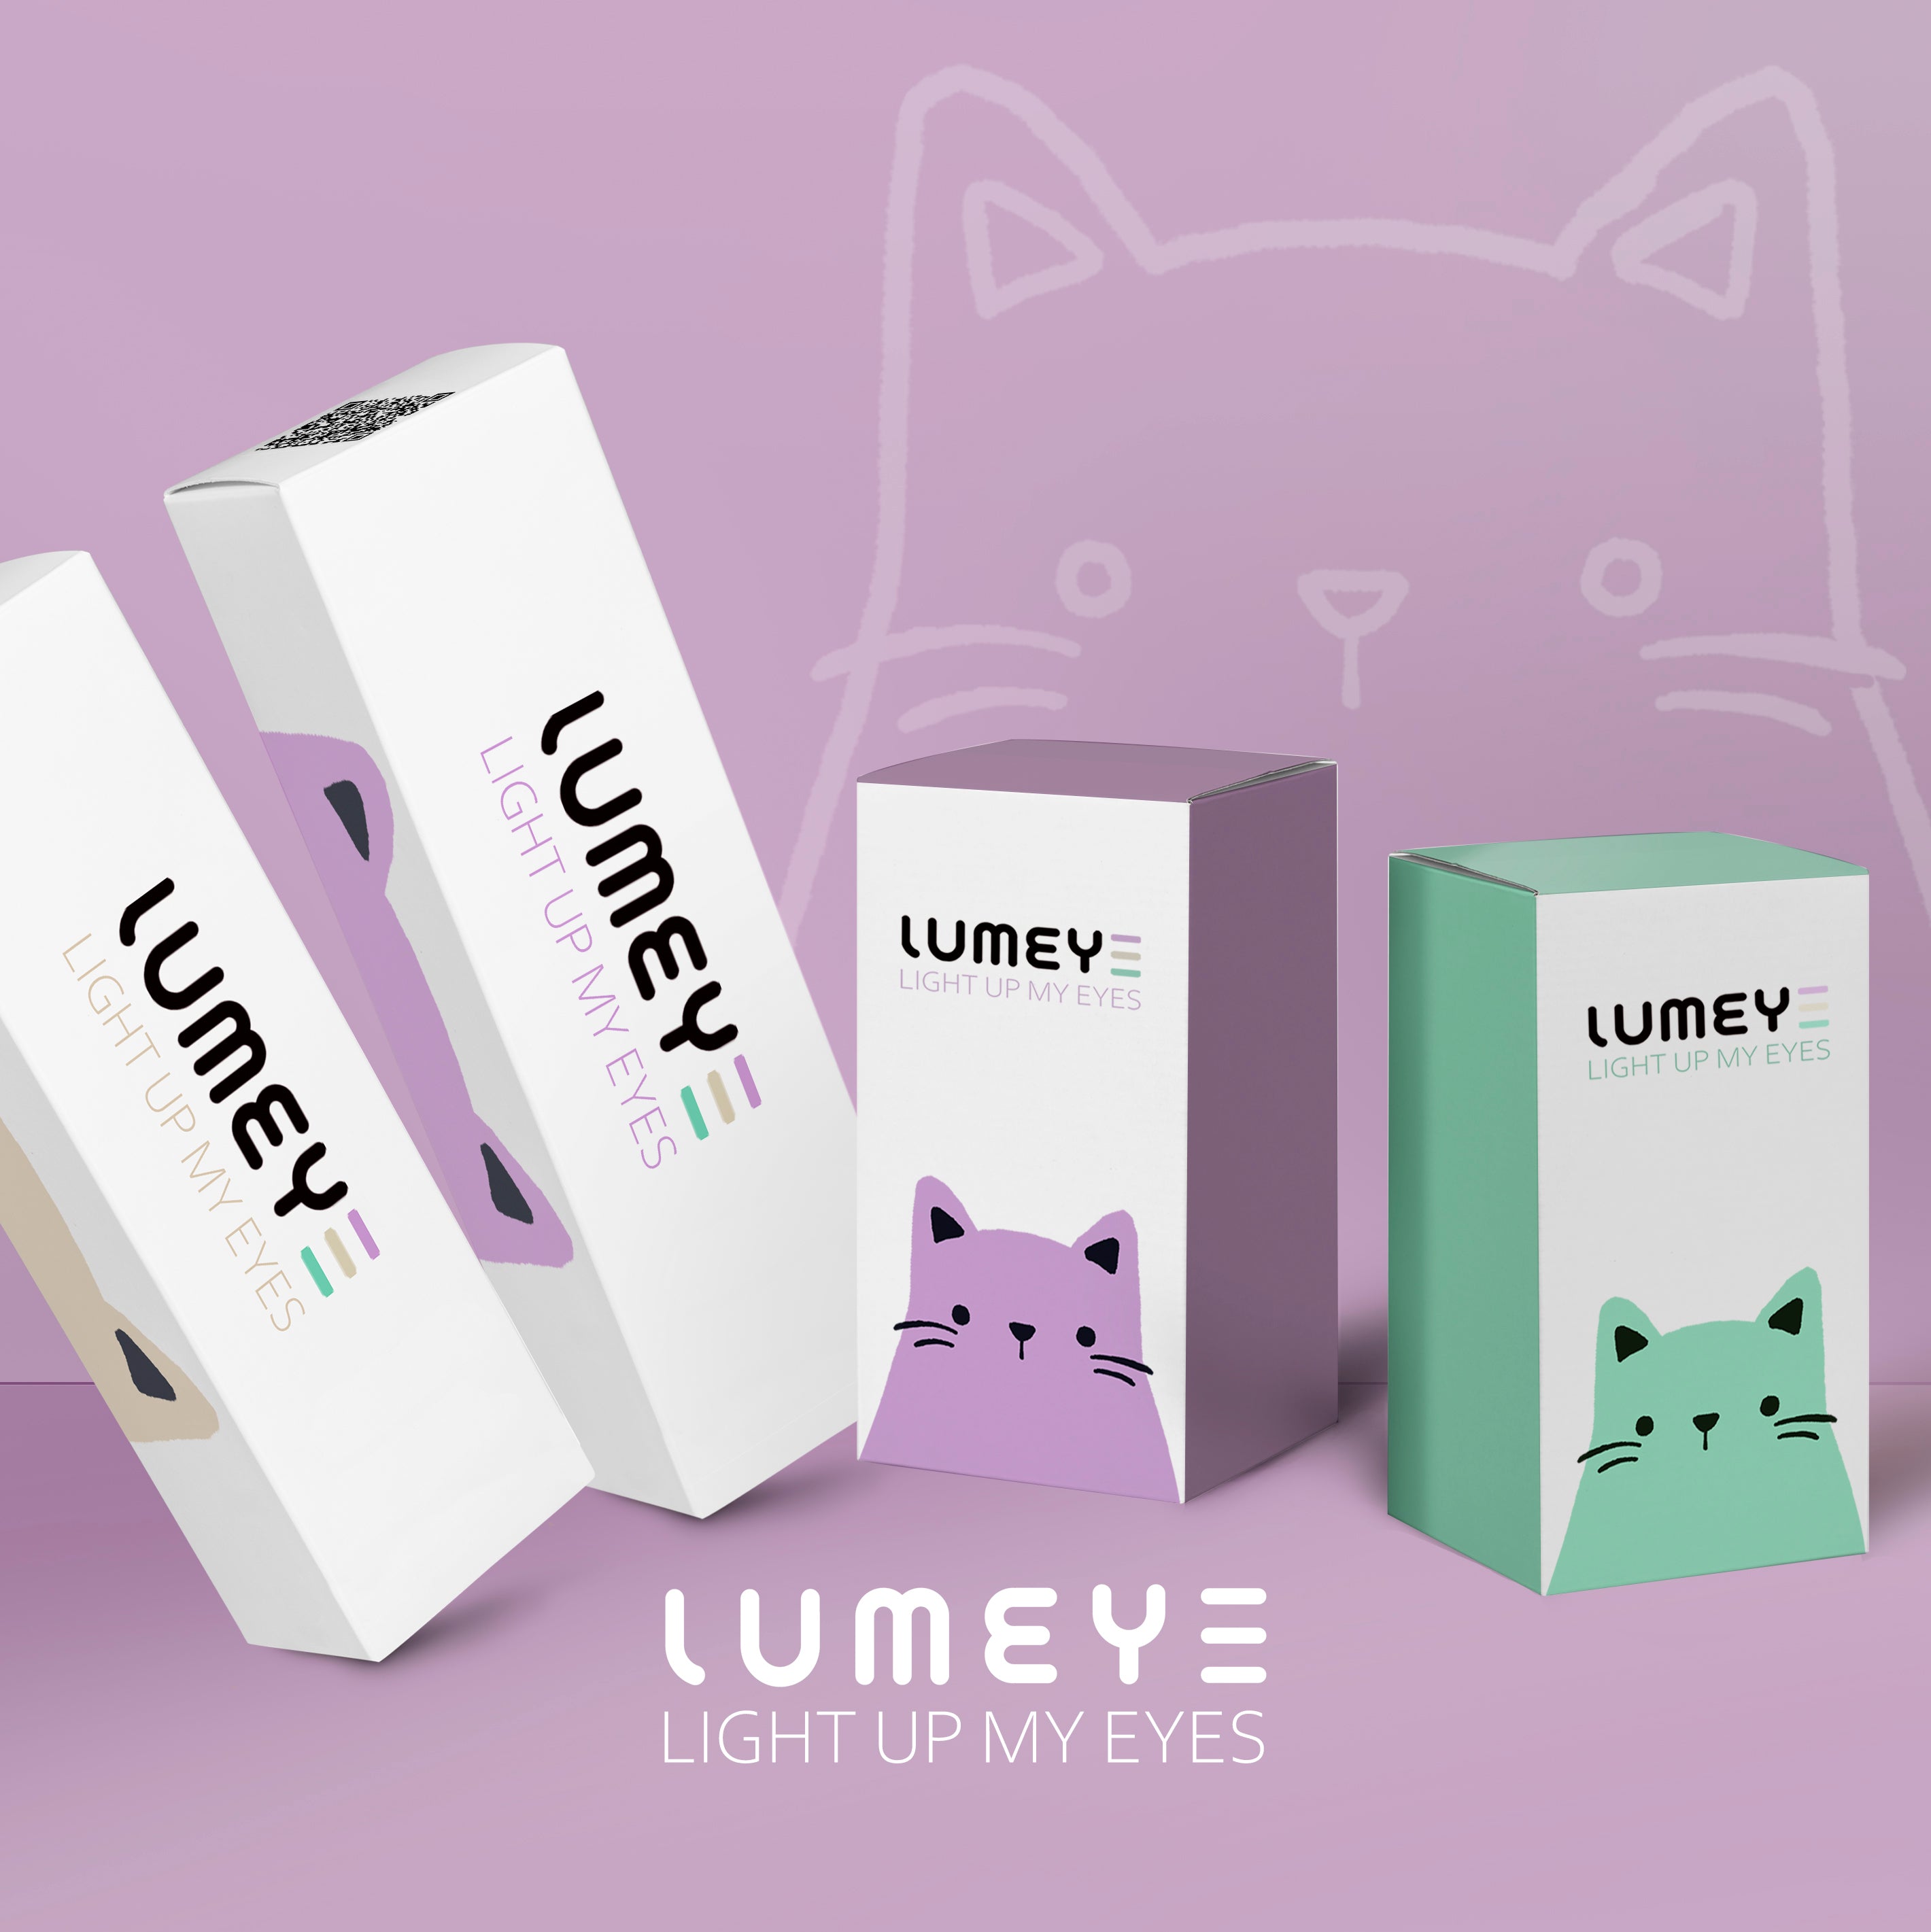 Best COLORED CONTACTS - LUMEYE Polar Lights Brown Colored Contact Lenses - LUMEYE